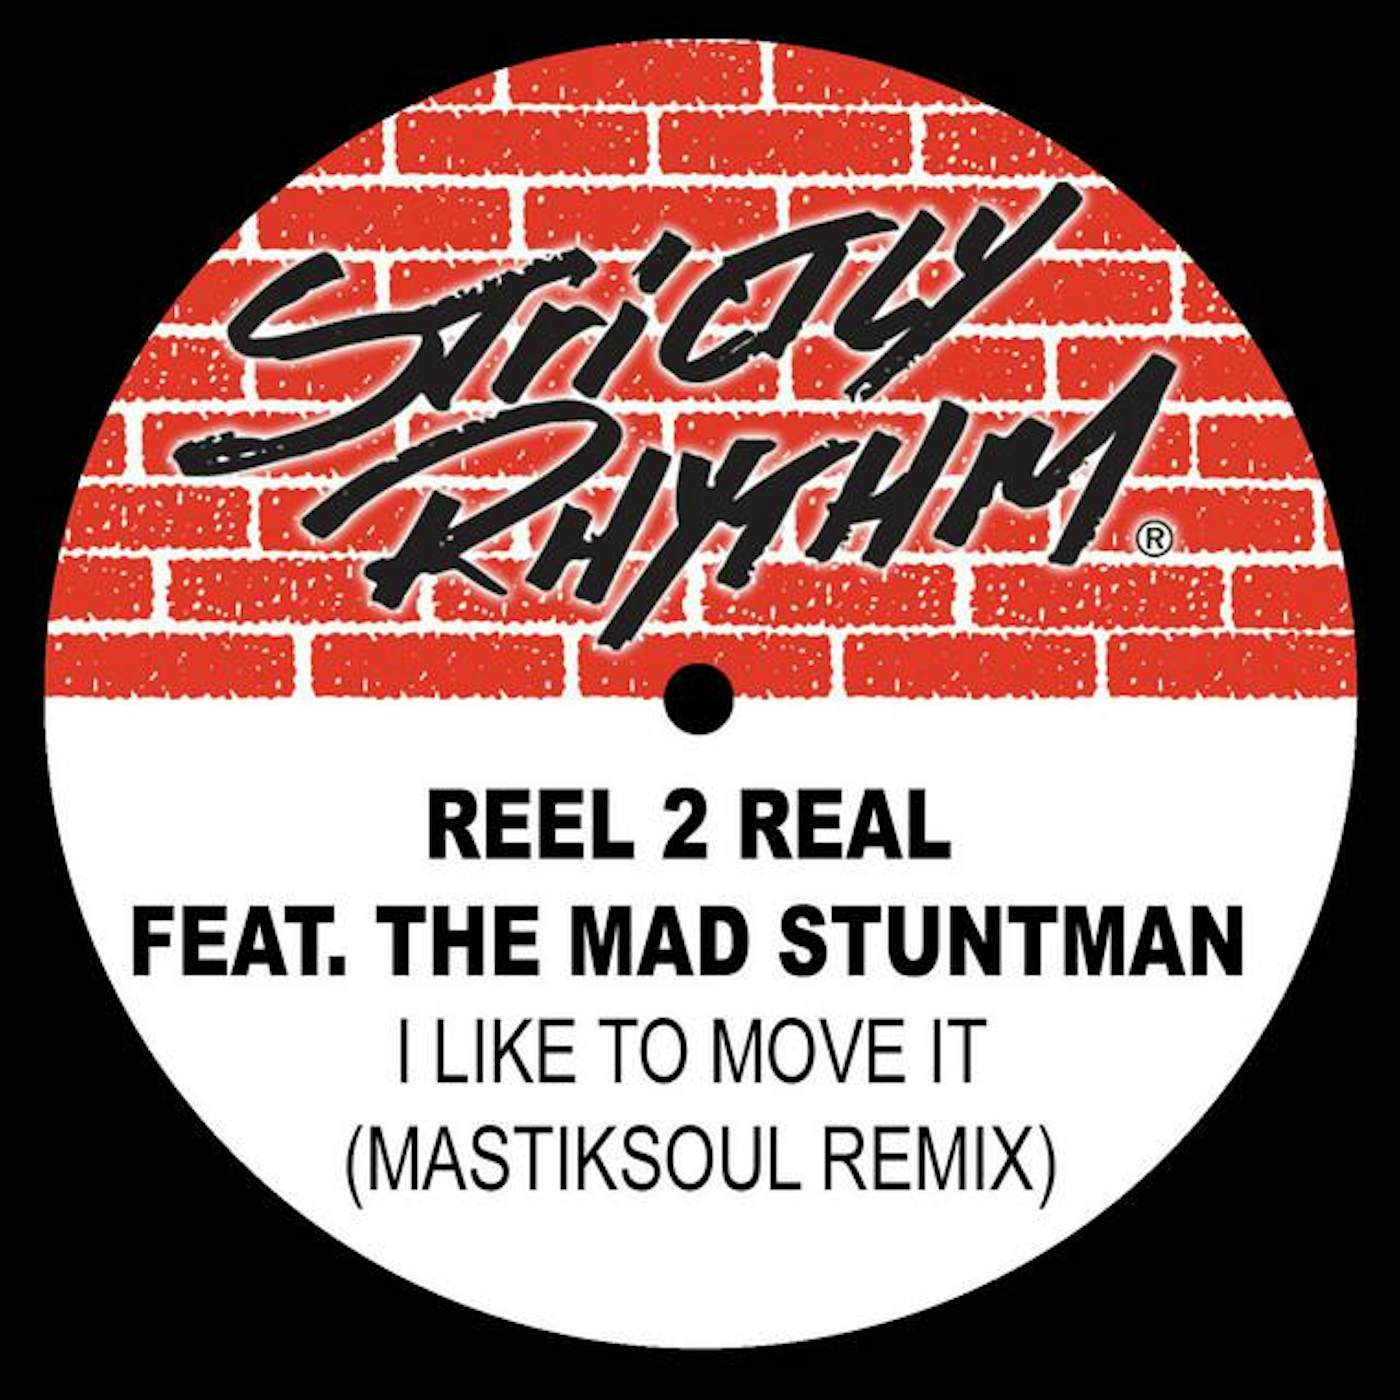 Reel 2 Real feat. The Mad Stuntman